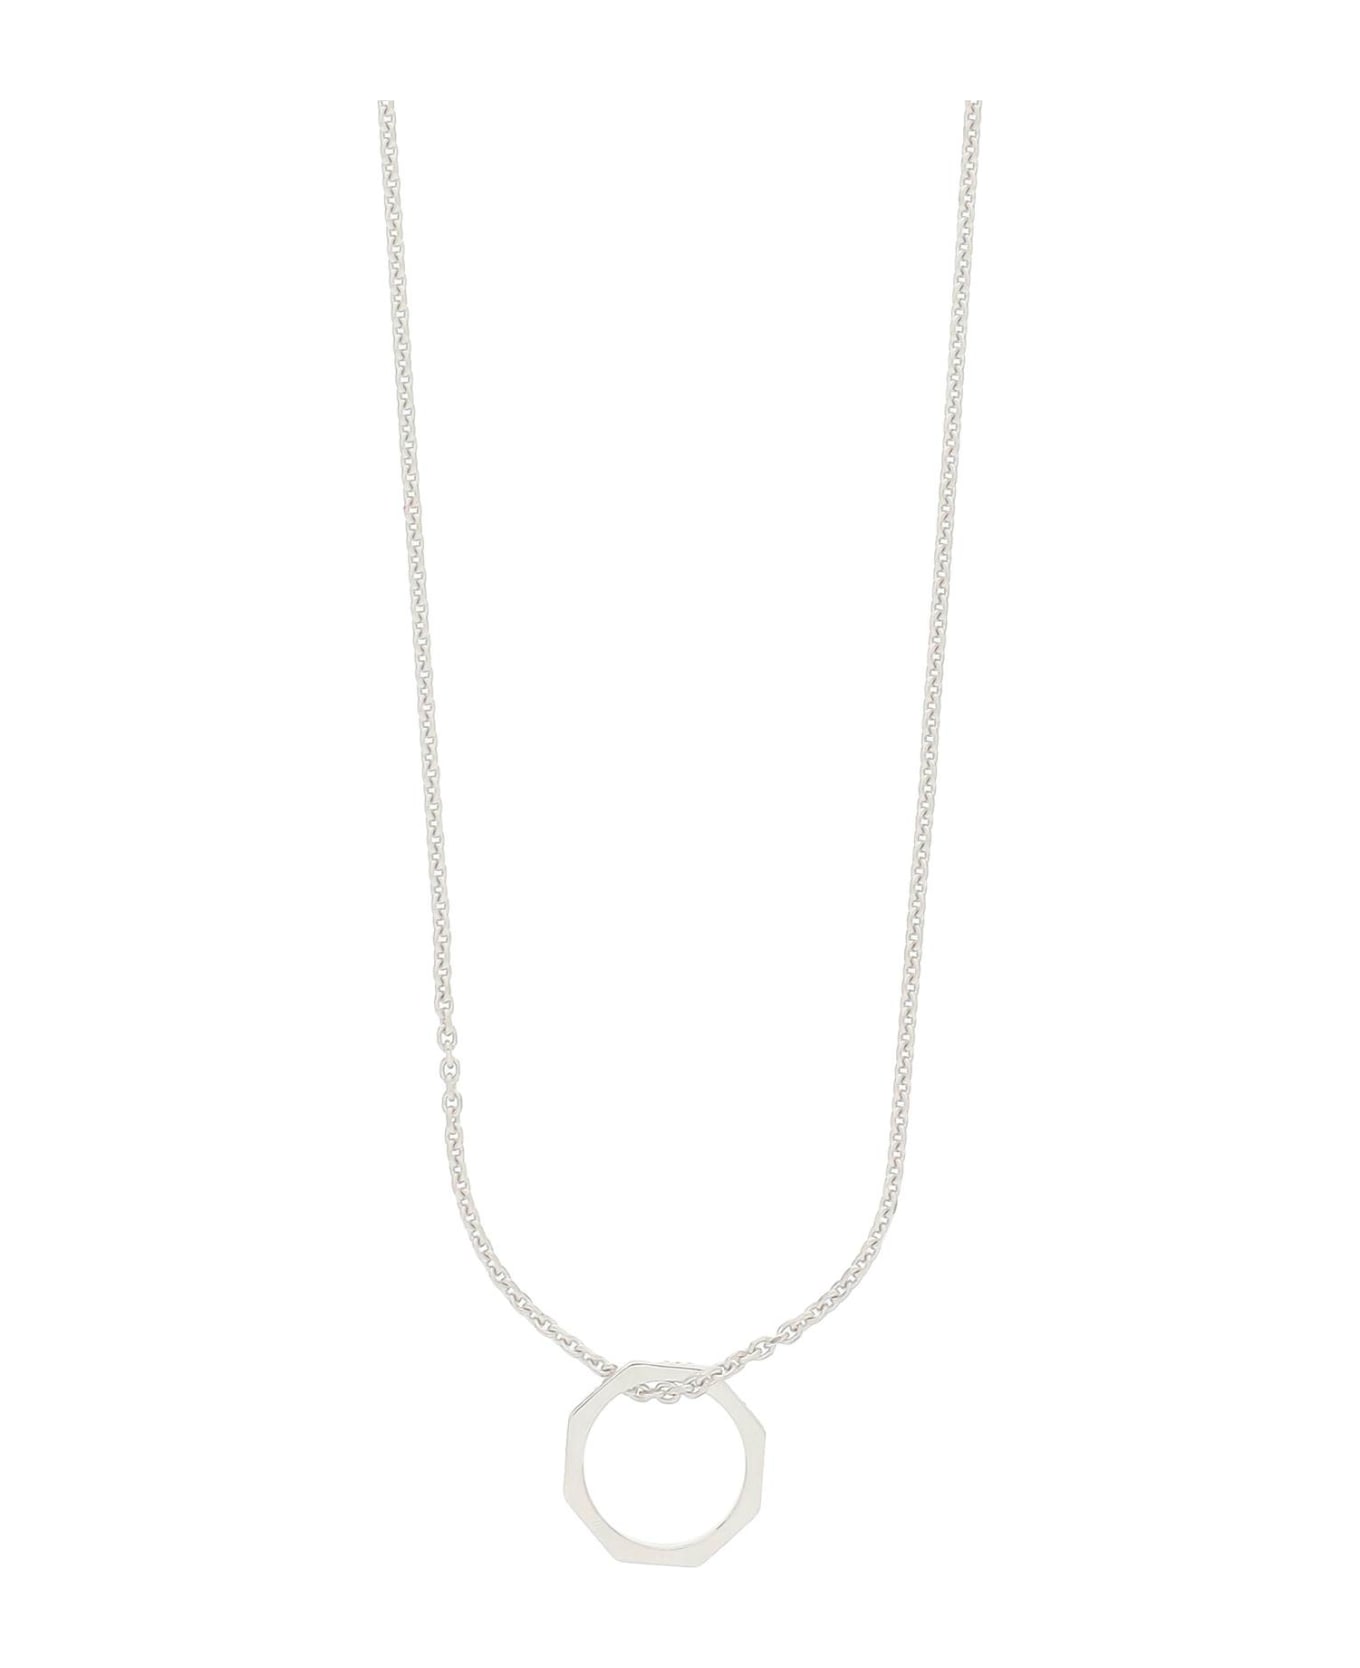 EÉRA 'oh' Necklace With Sunglasses Holder - SILVER (Silver) ネックレス